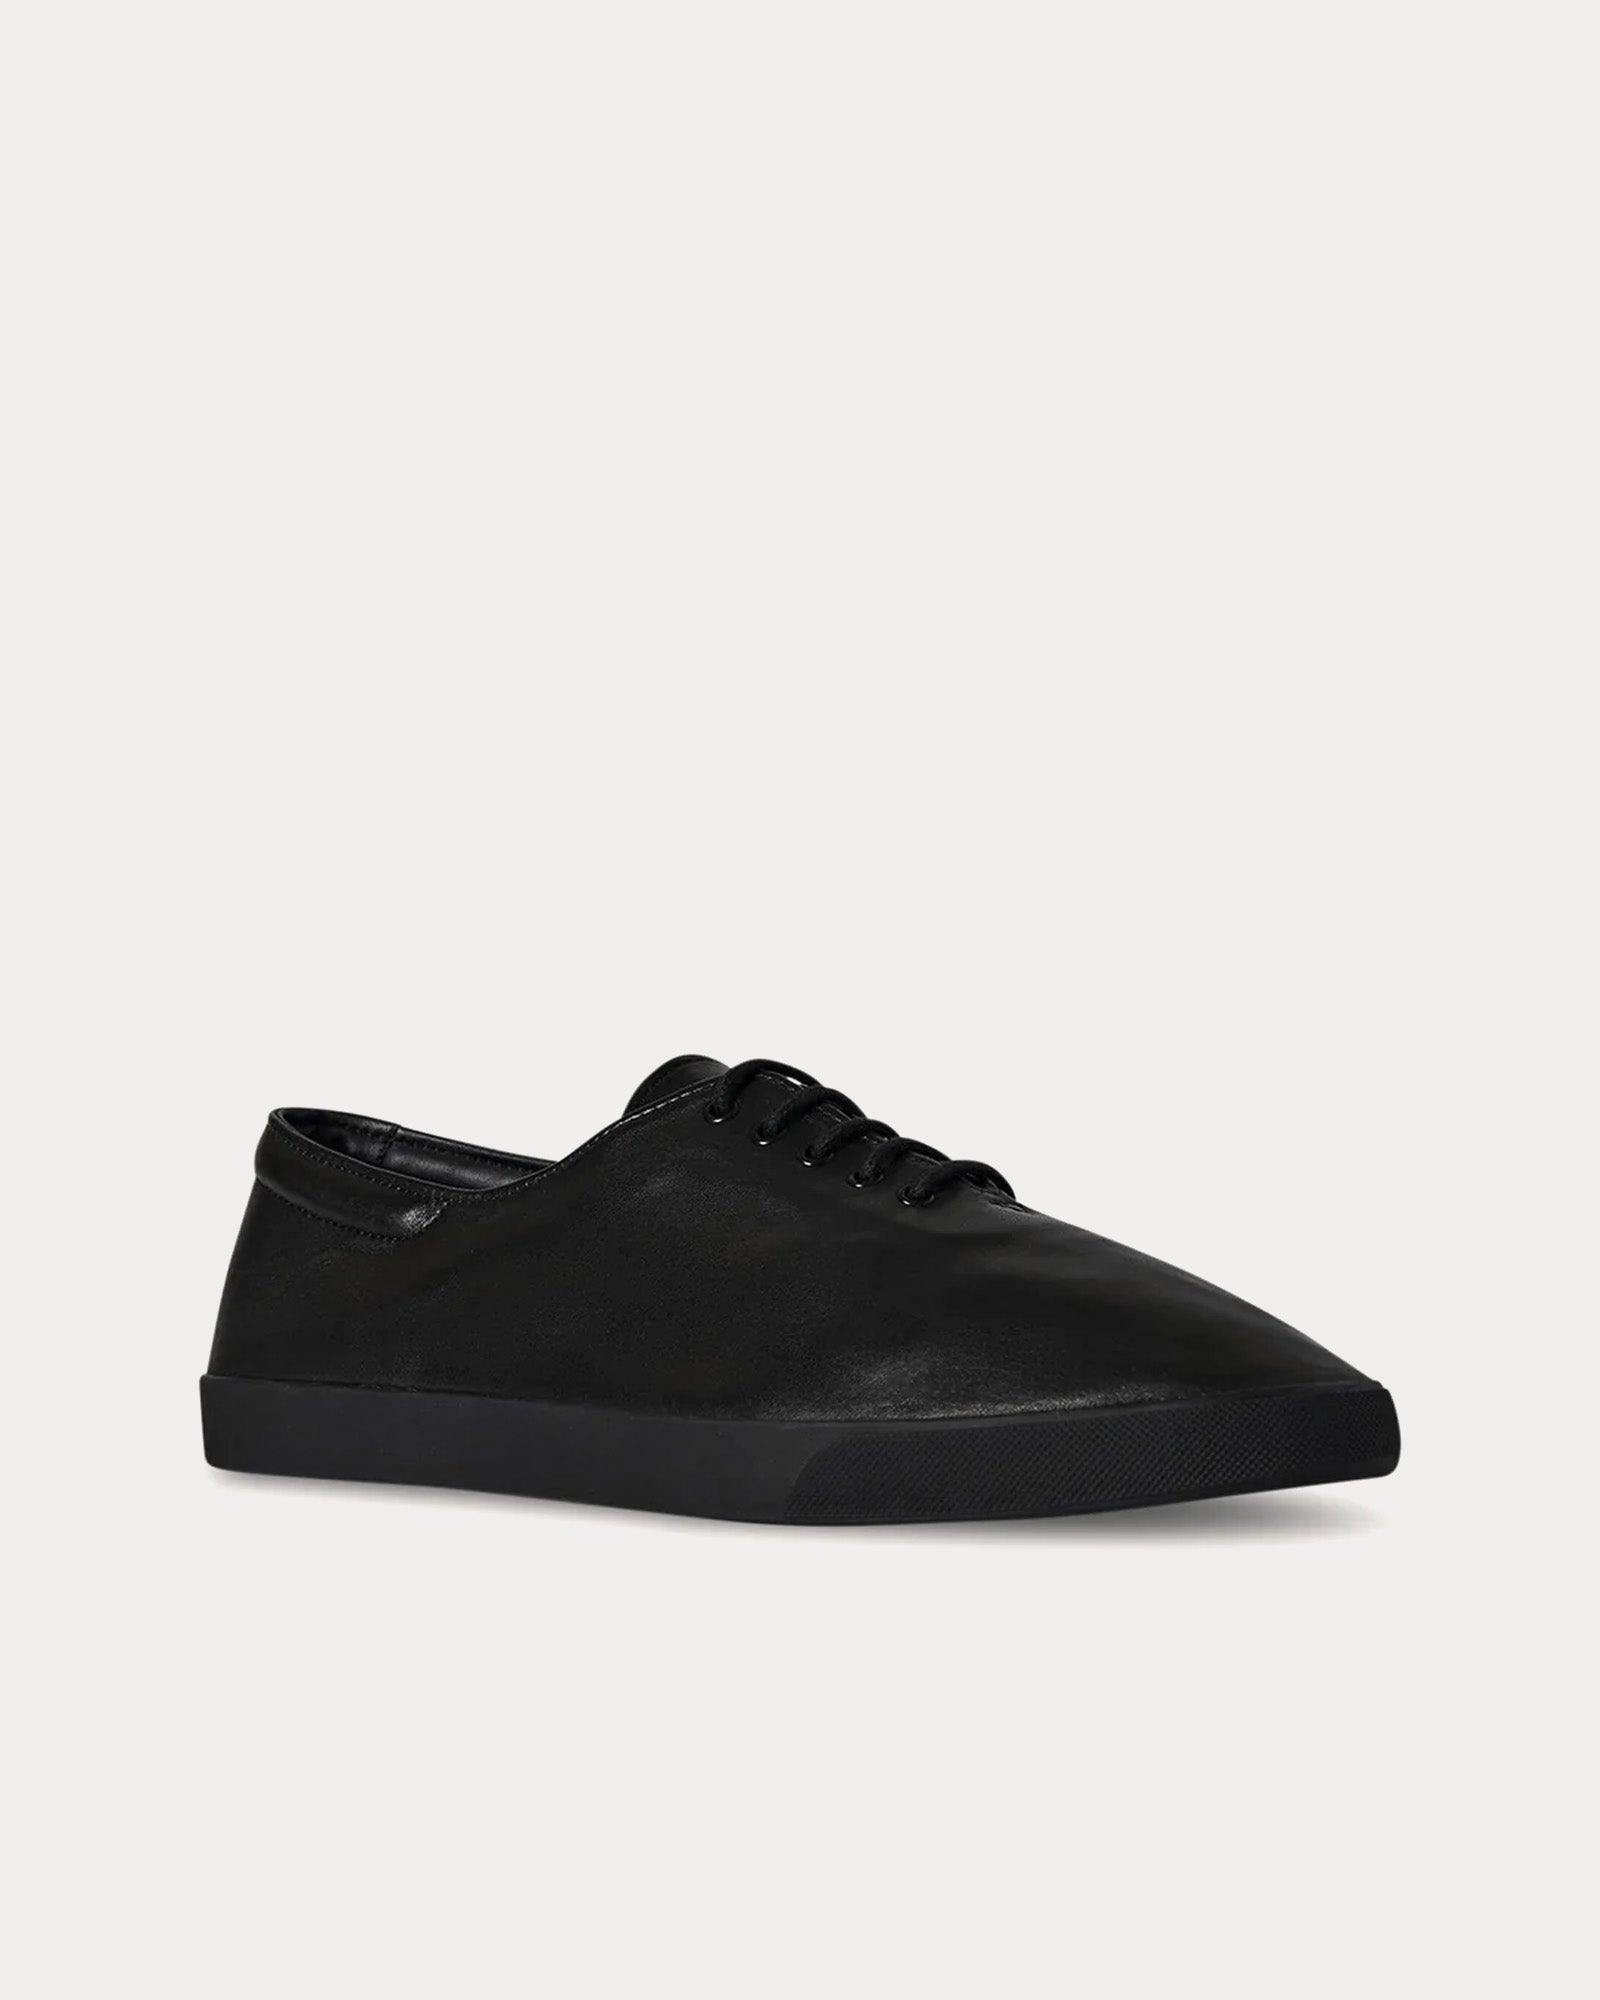 The Row - Sam Leather Black / Black Low Top Sneakers